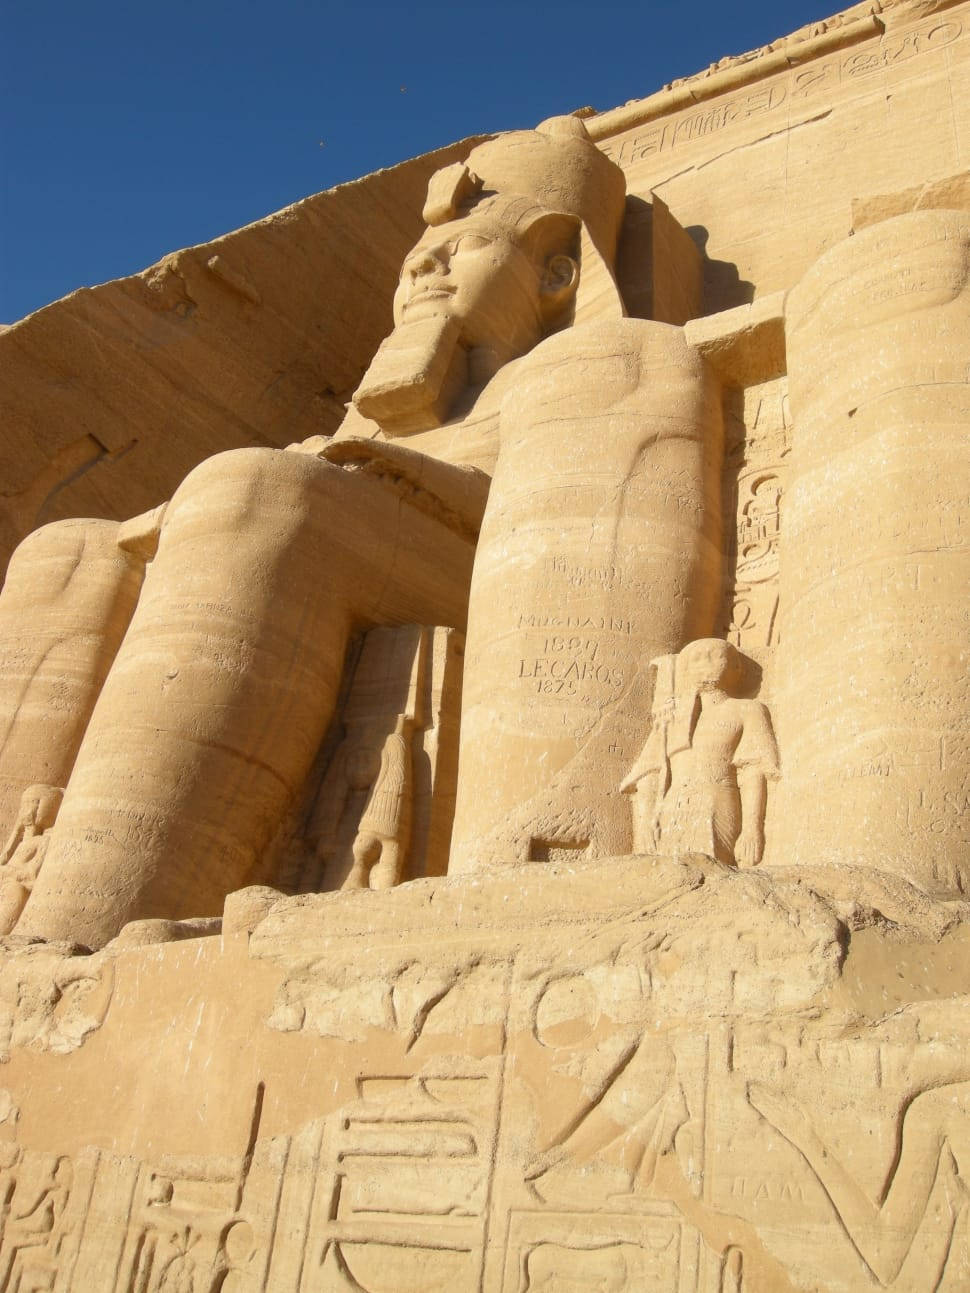 Whole-body Picture Of Ramses Ii The Great At Abu Simbel's Temple Wallpaper